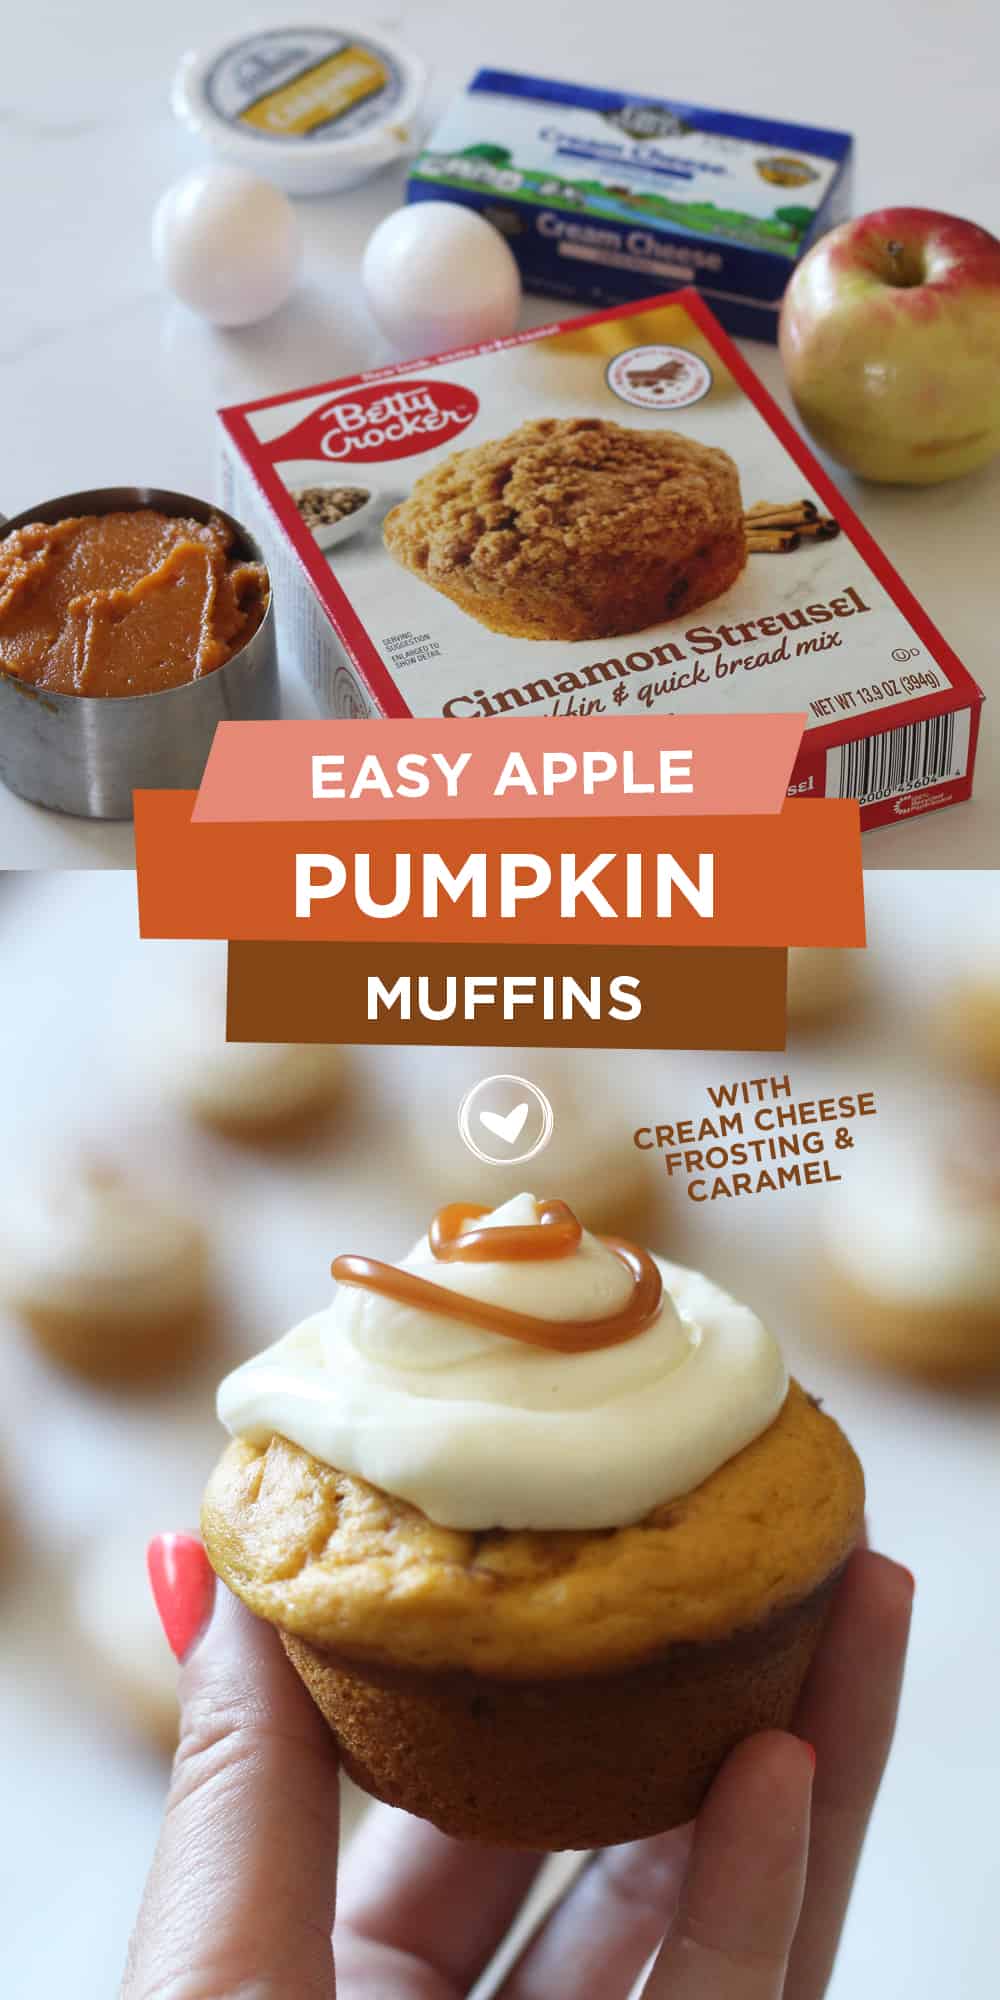 Easy Apple Pumpkin Muffins With Cream Cheese Frosting and Caramel 